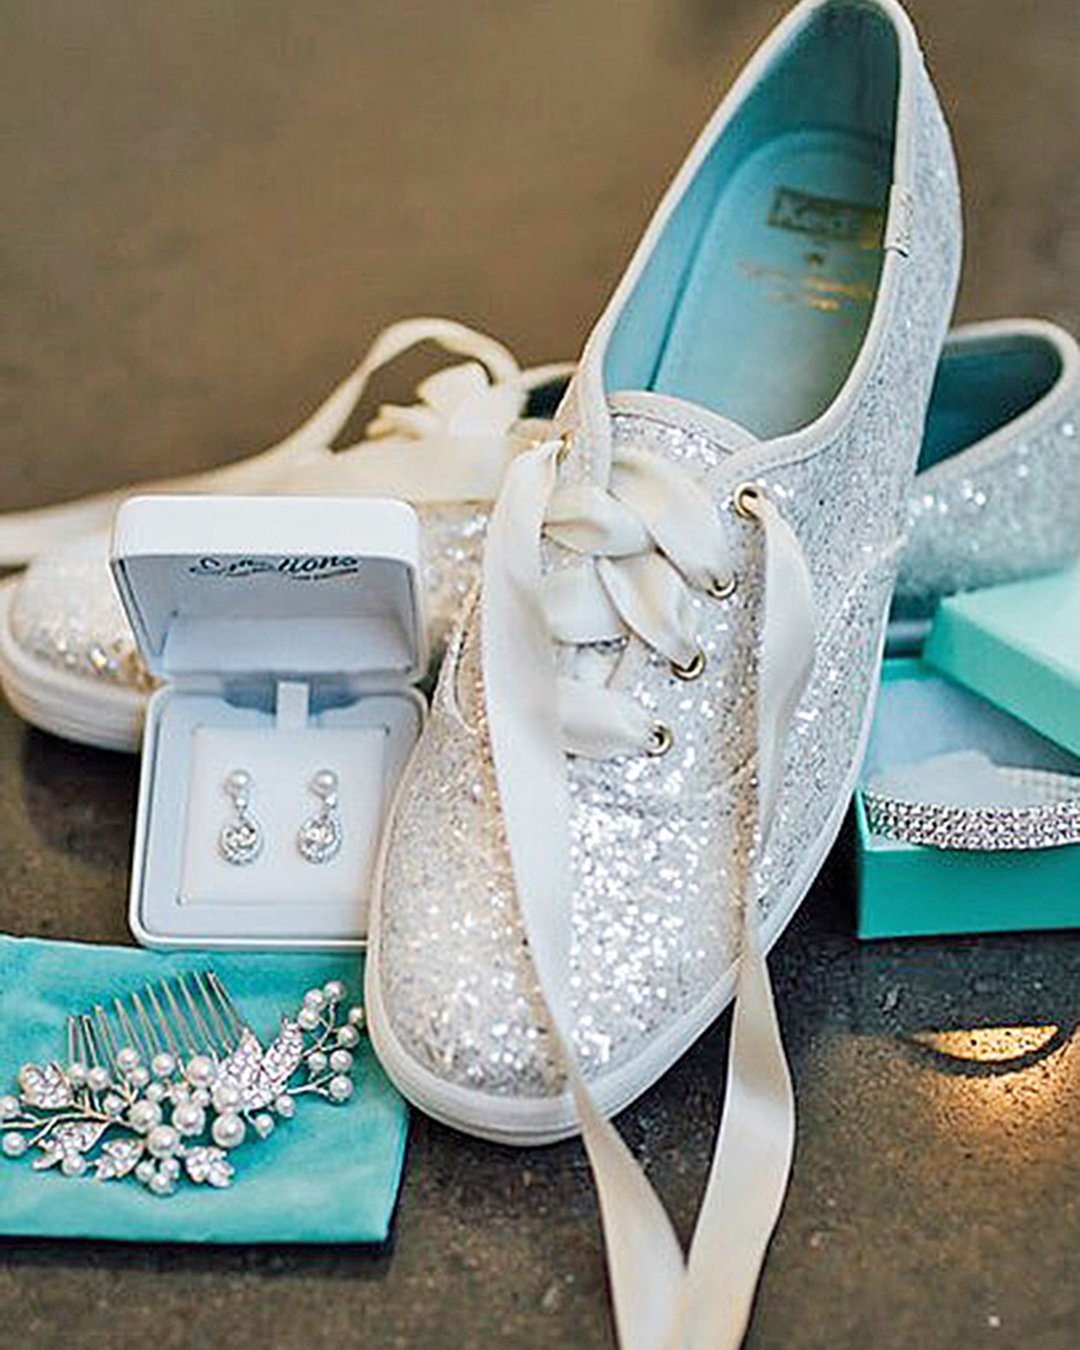 33 Comfortable Wedding Shoes That Are Stylish